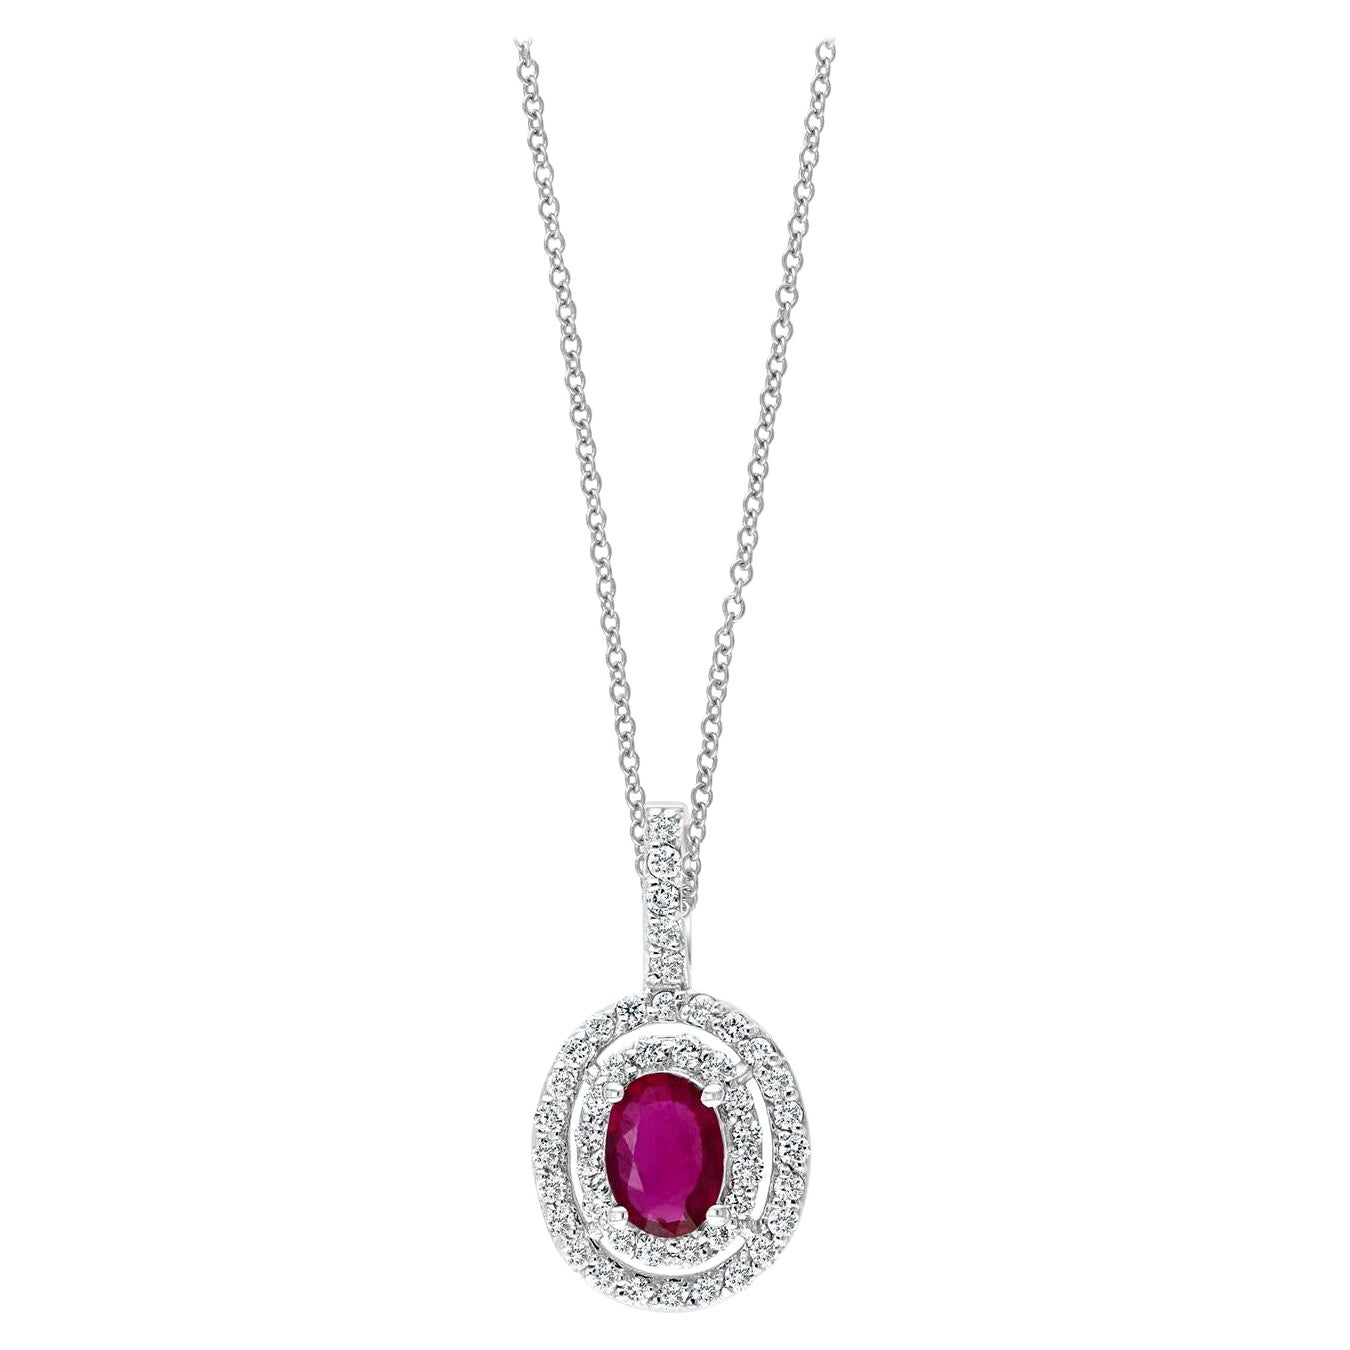 Grandeur 0.81 Carat Oval Cut Ruby and Diamond Pendant in 14K White Gold For Sale